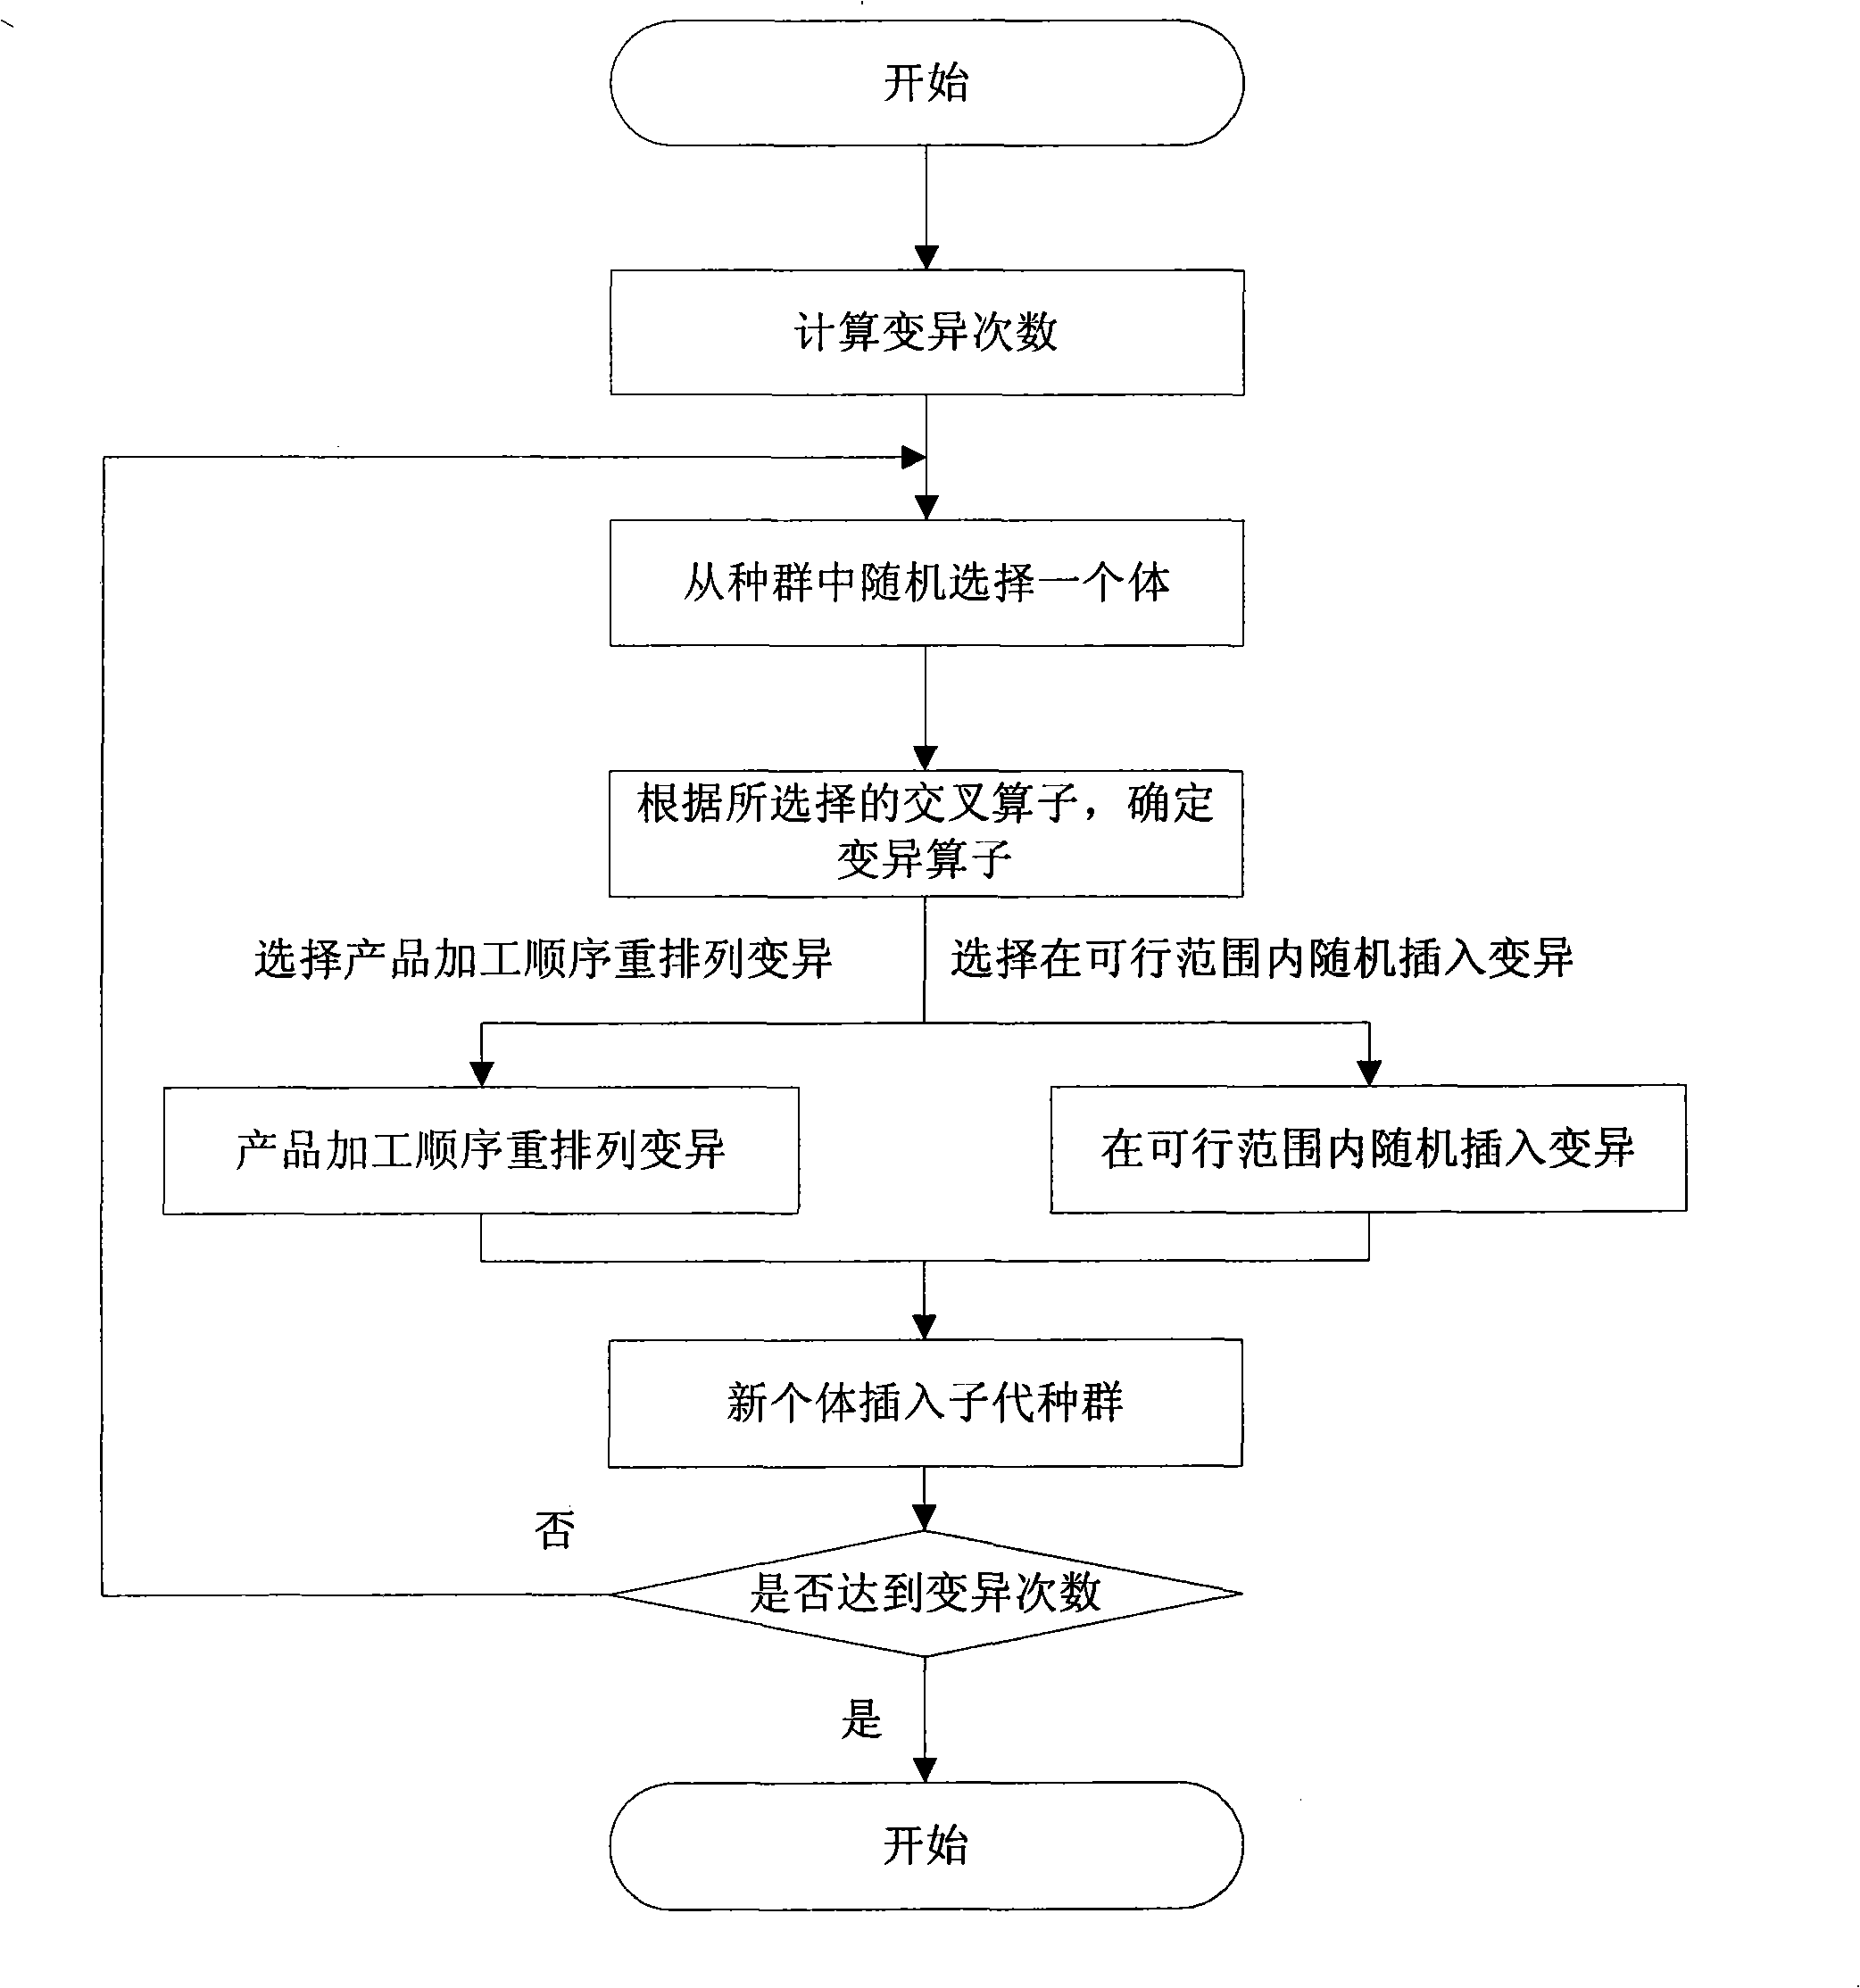 Genetic operation operator based on indent structure for producing quening system